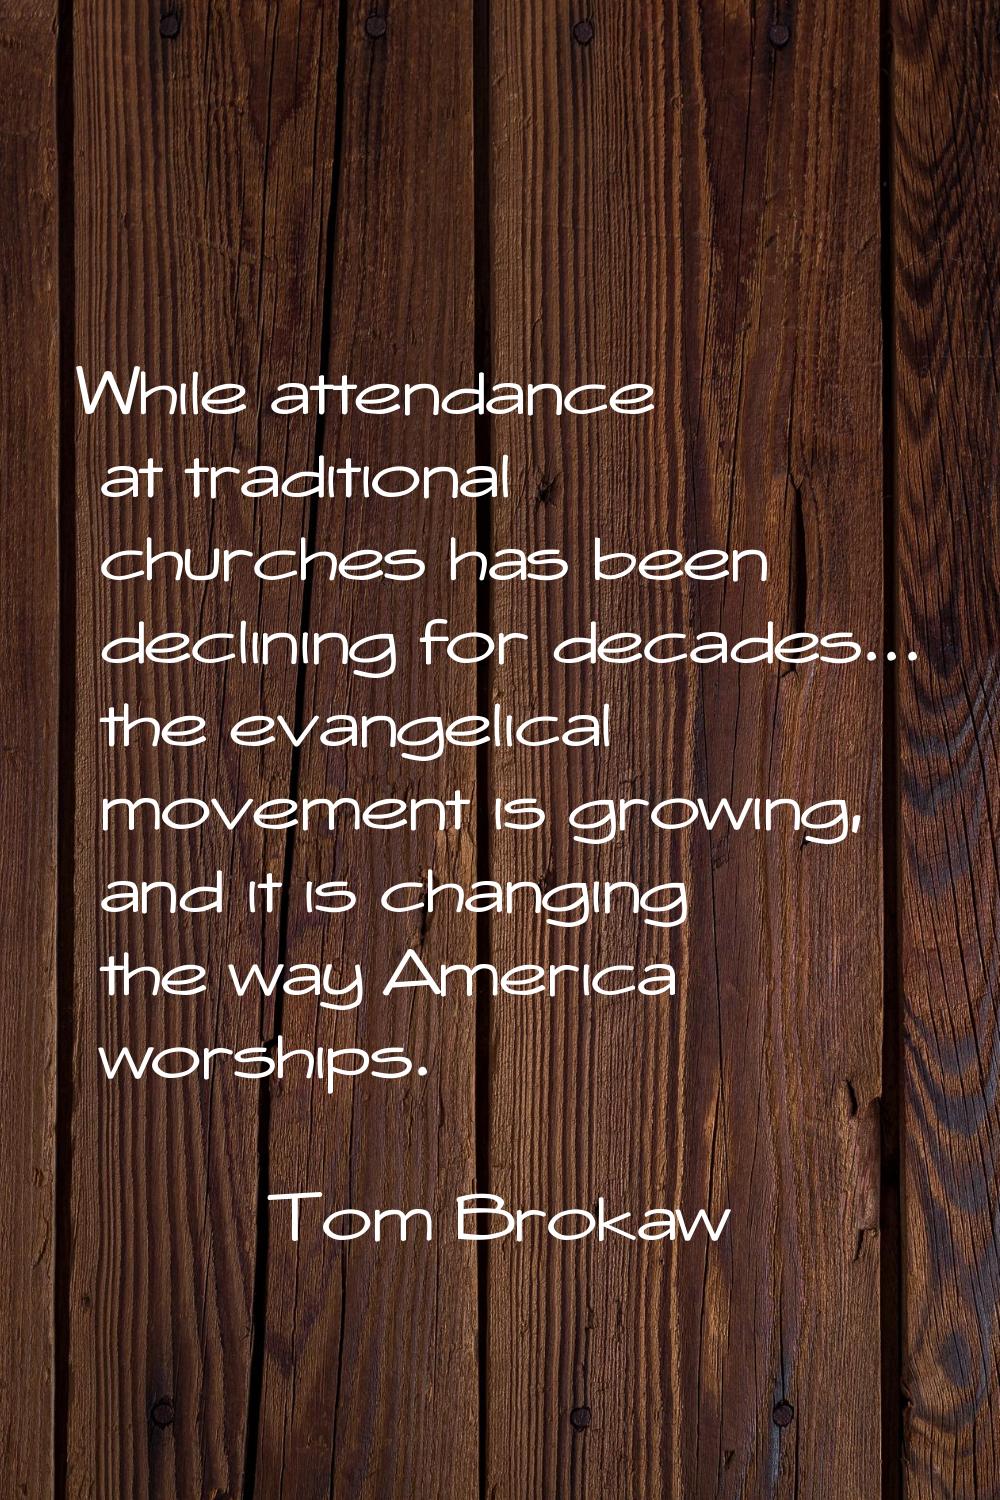 While attendance at traditional churches has been declining for decades... the evangelical movement